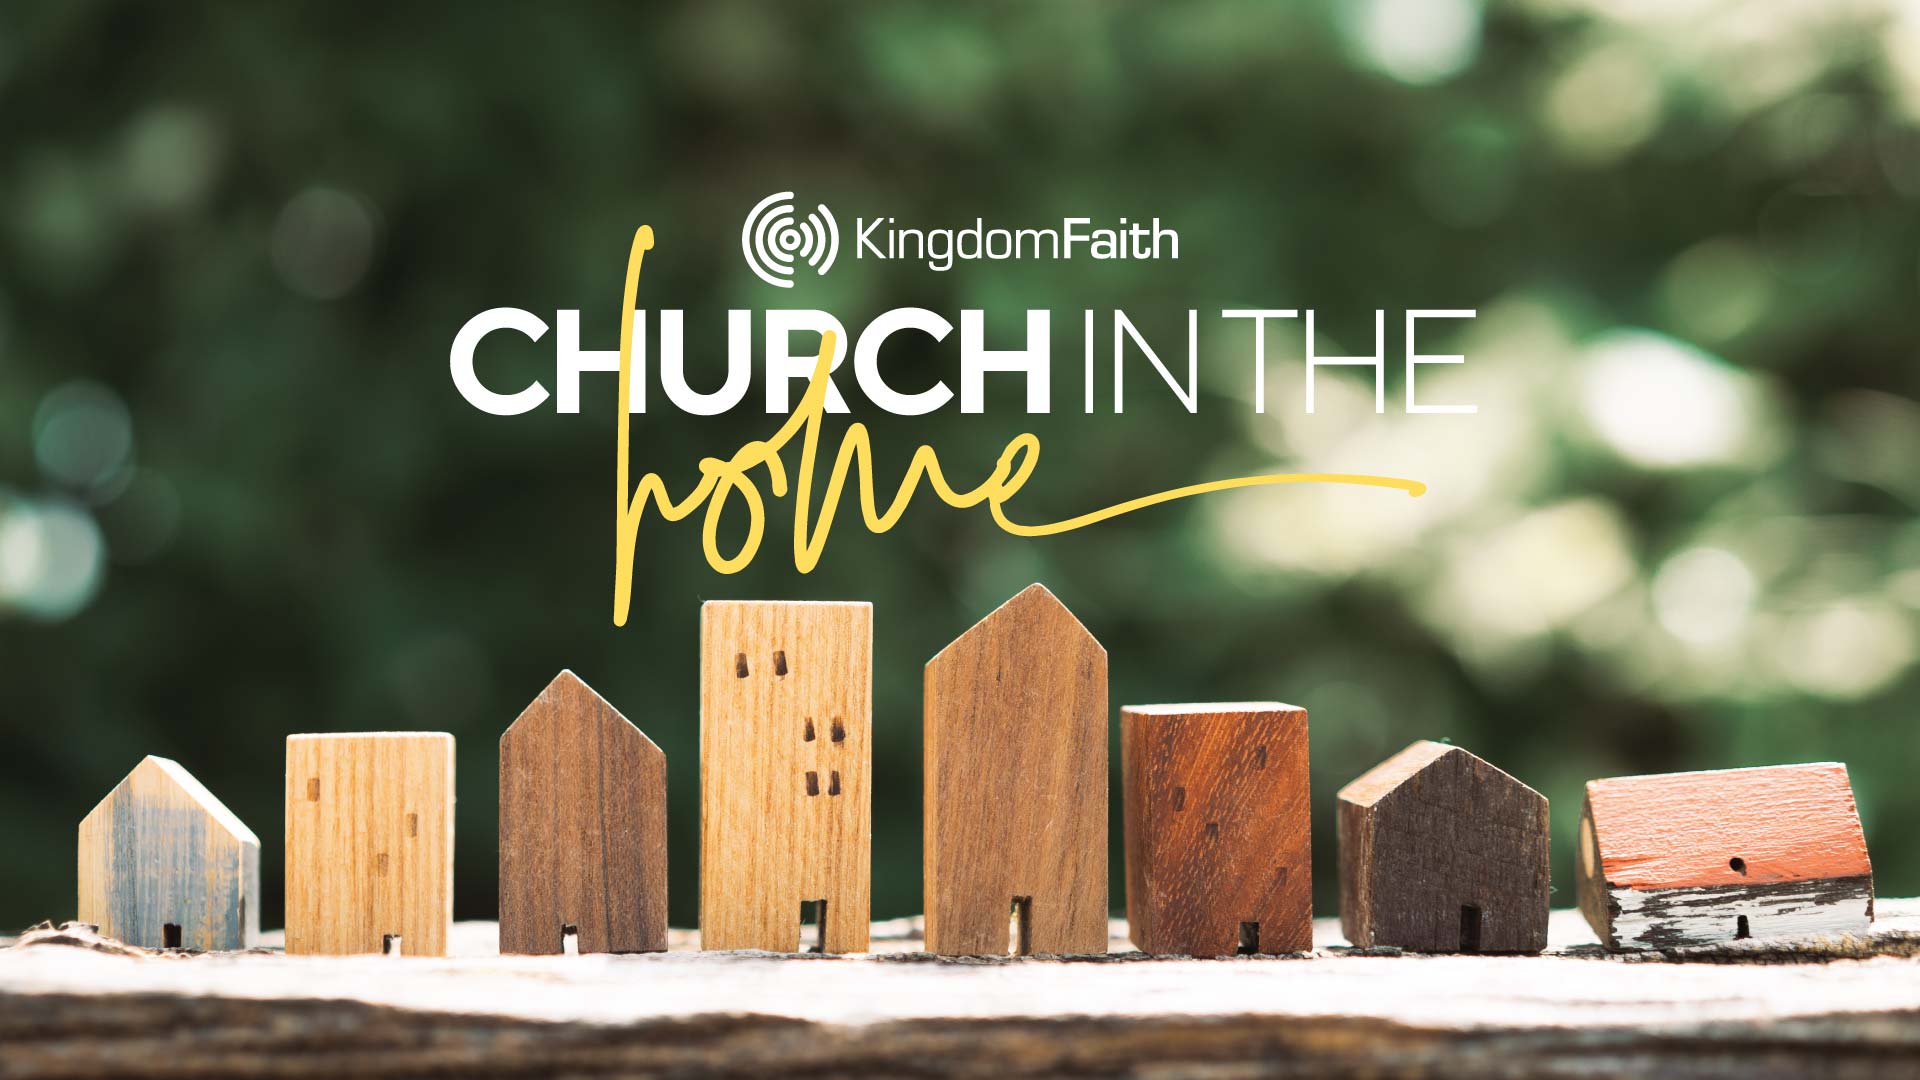 Church in the home - Sunday 01 Oct